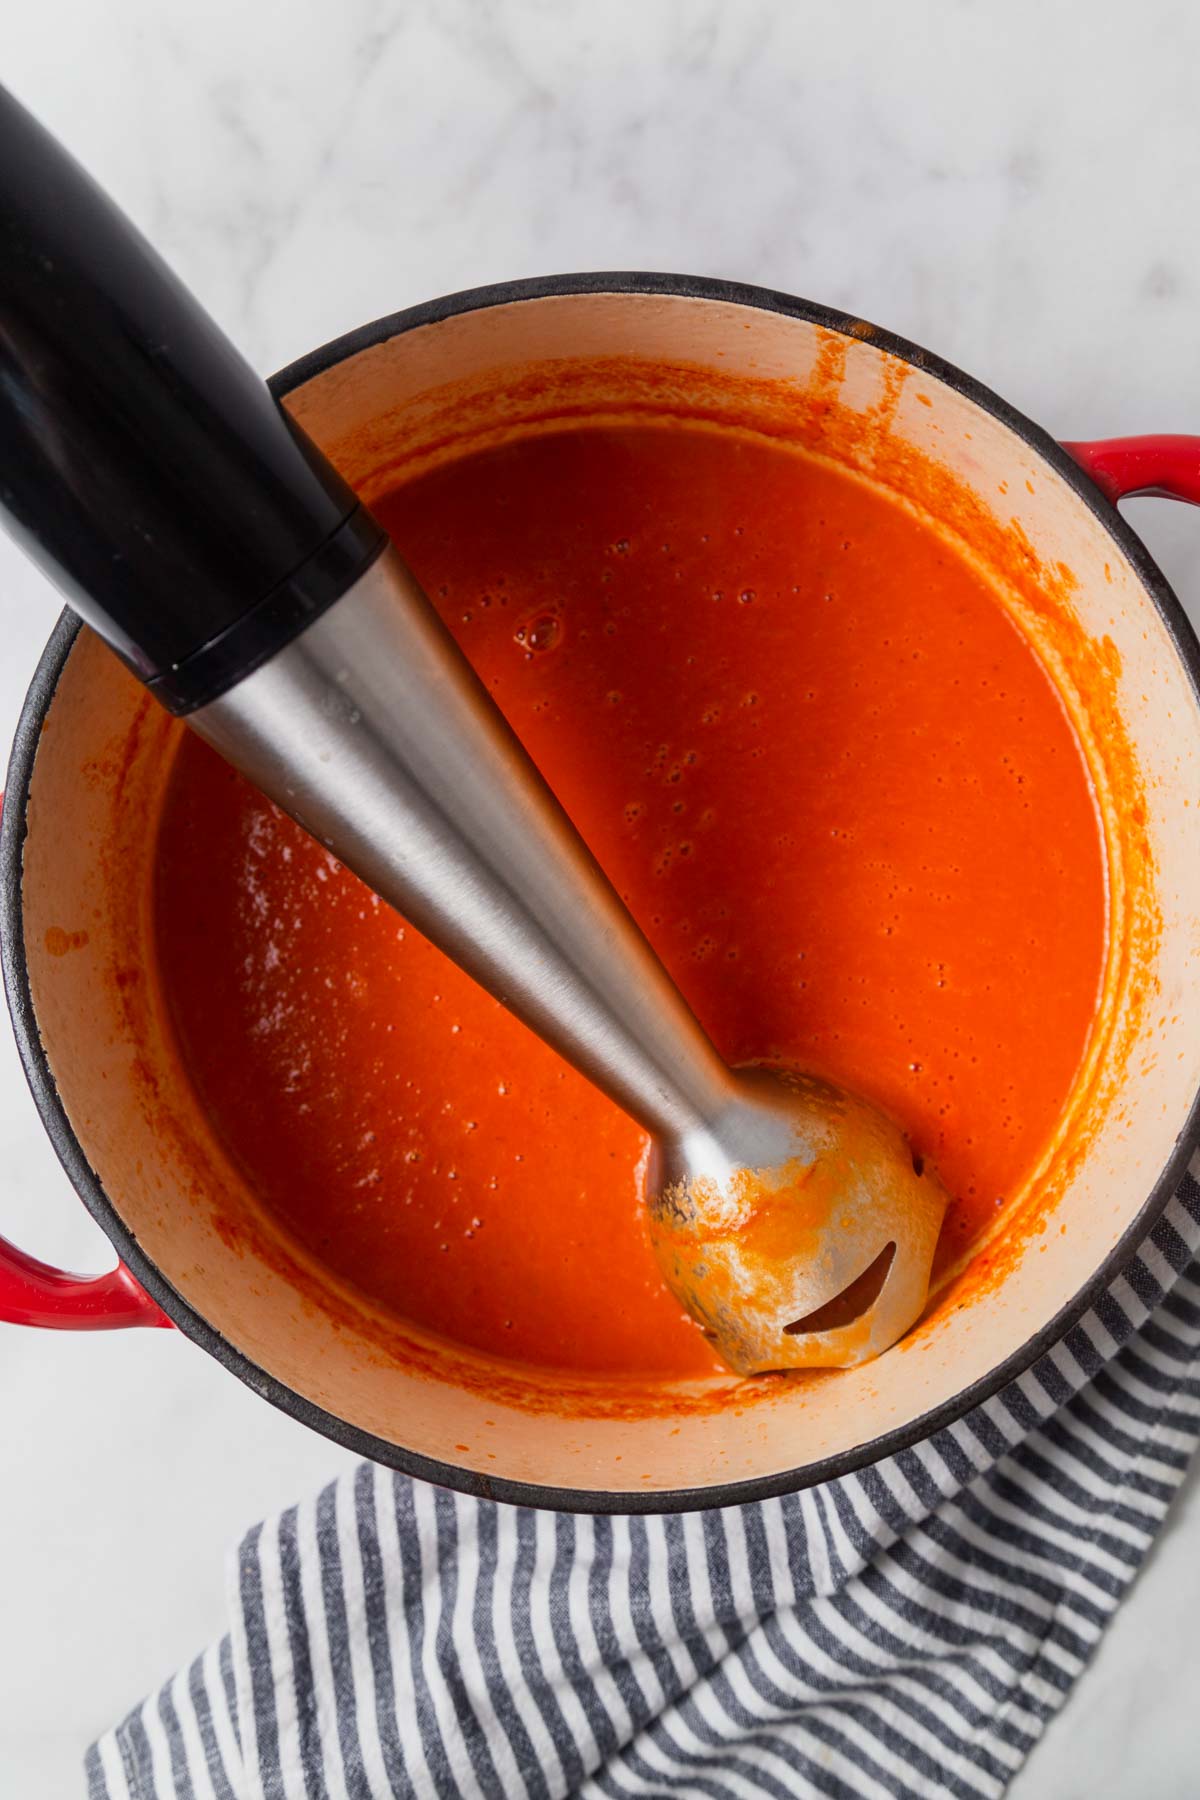 pureeing the tomato soup with a hand blender.